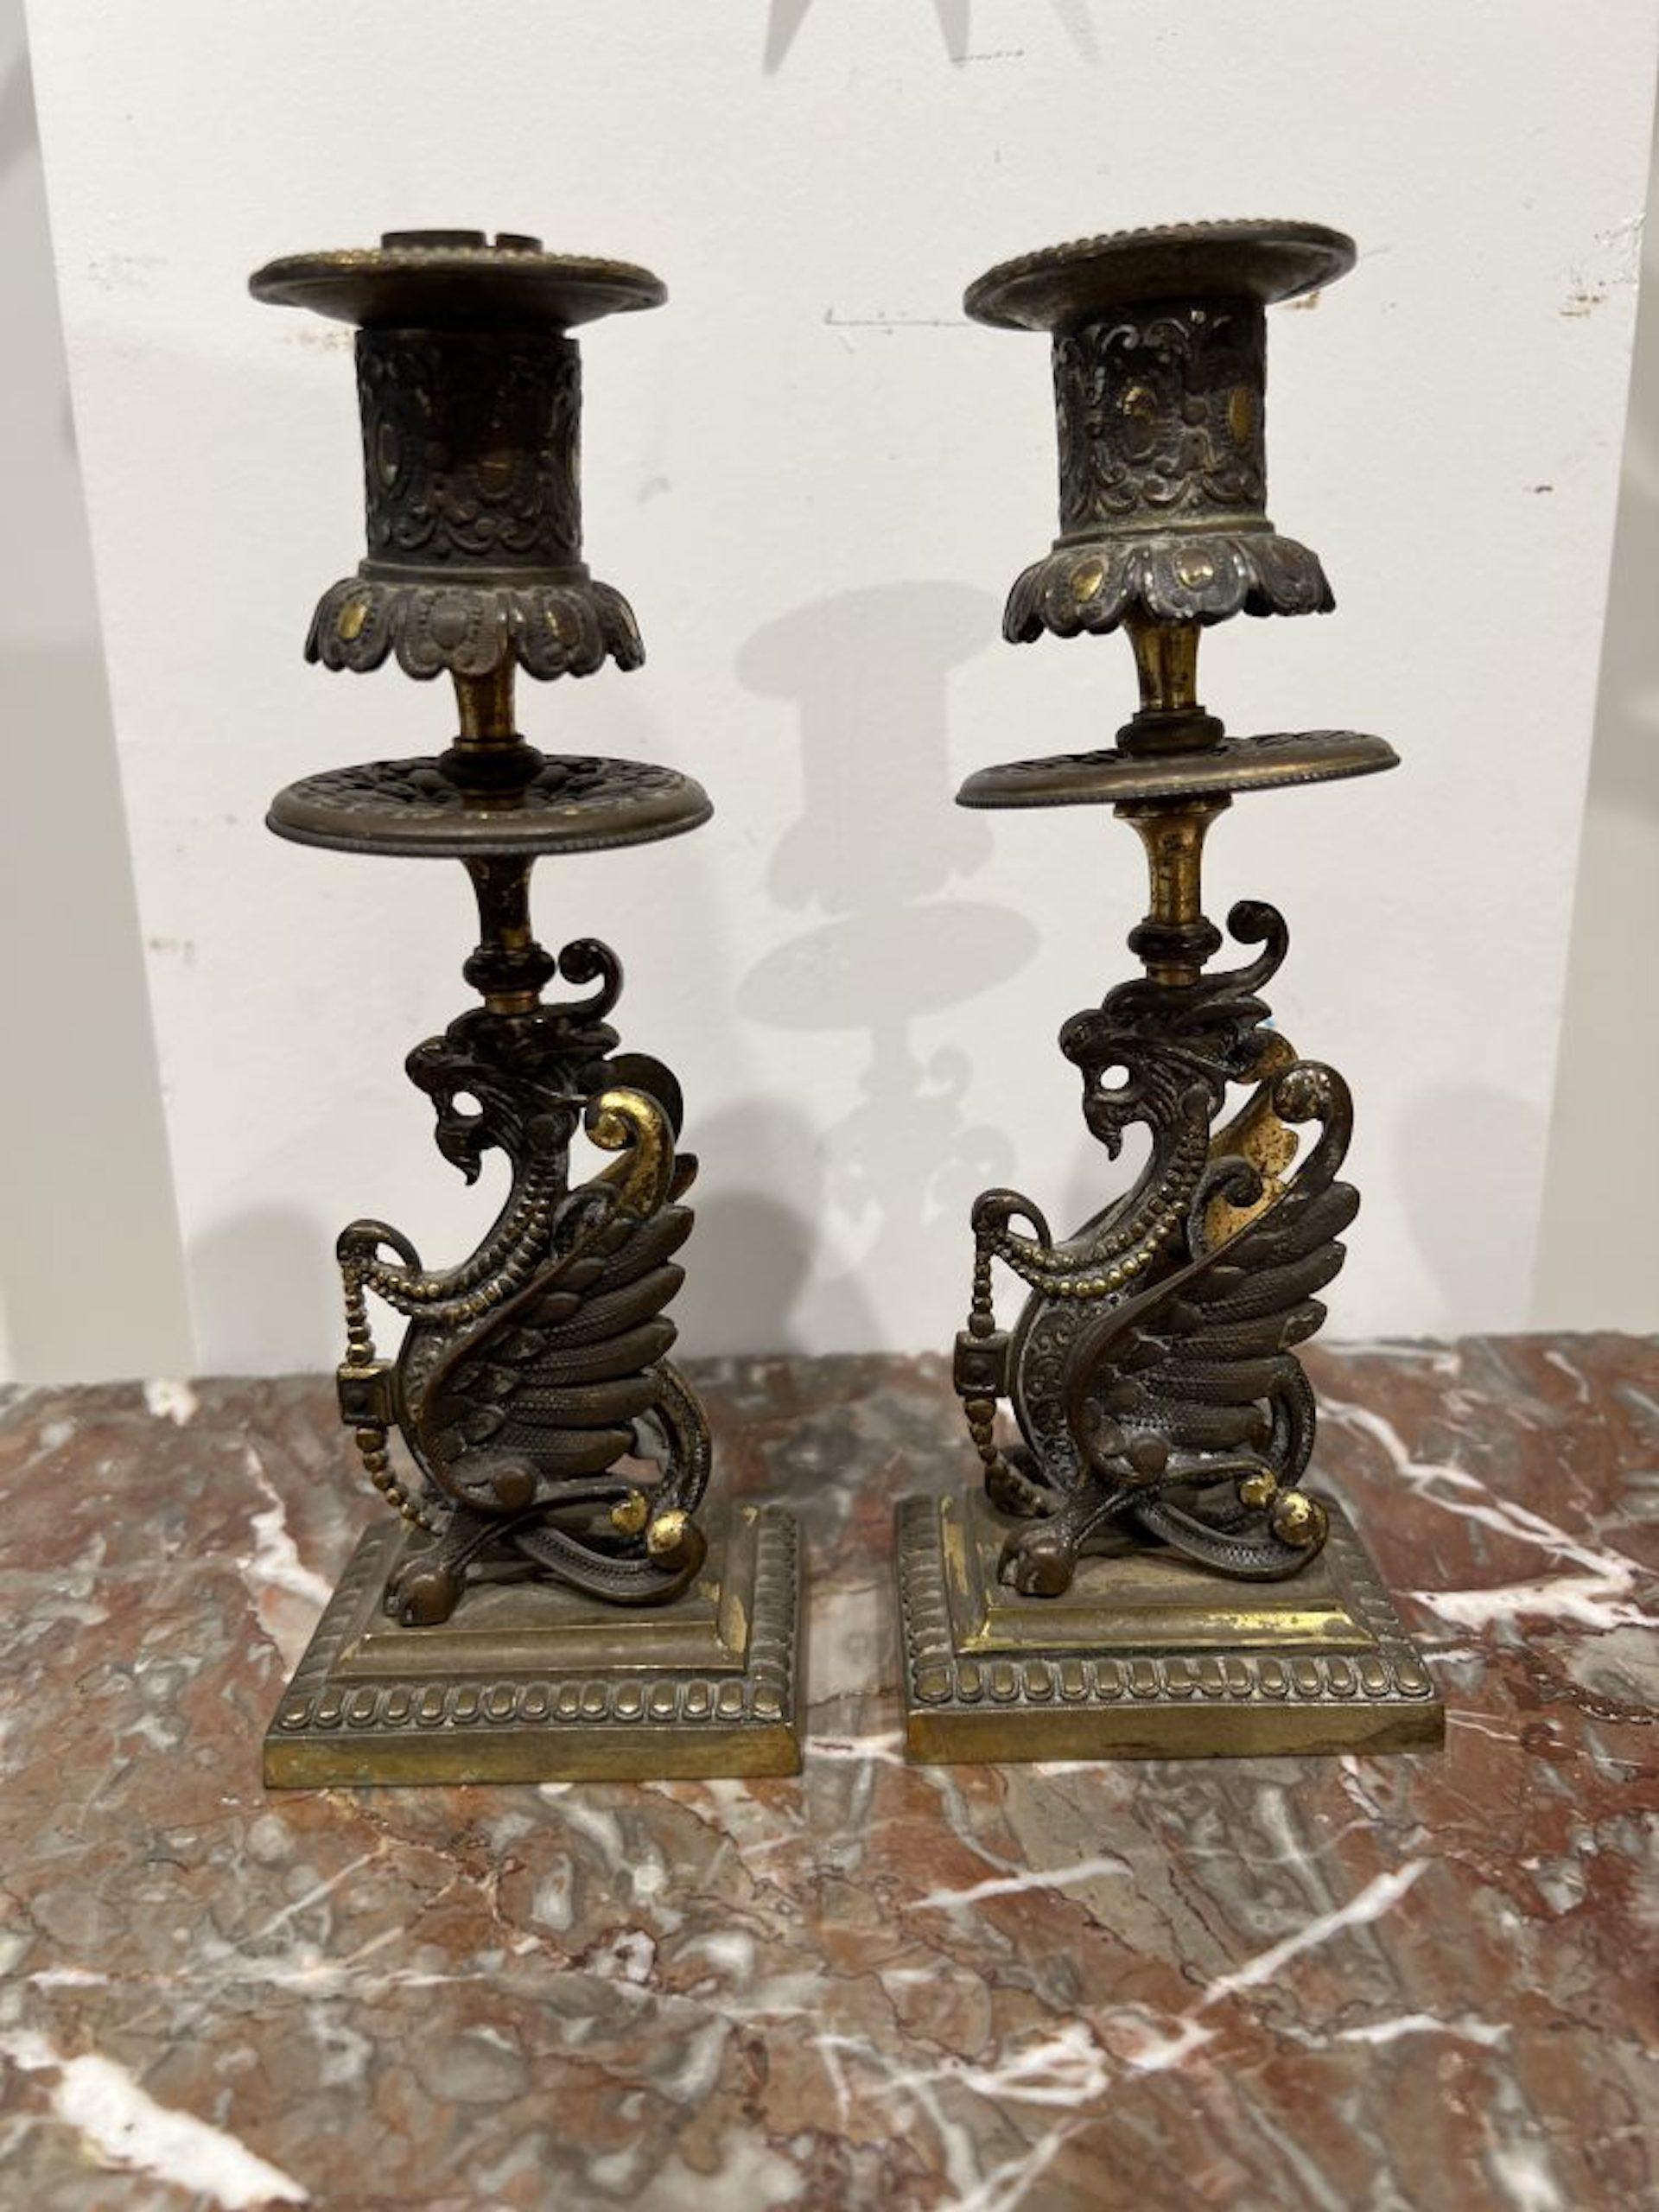 Exotic dragons embellish this pair of single candleholders.